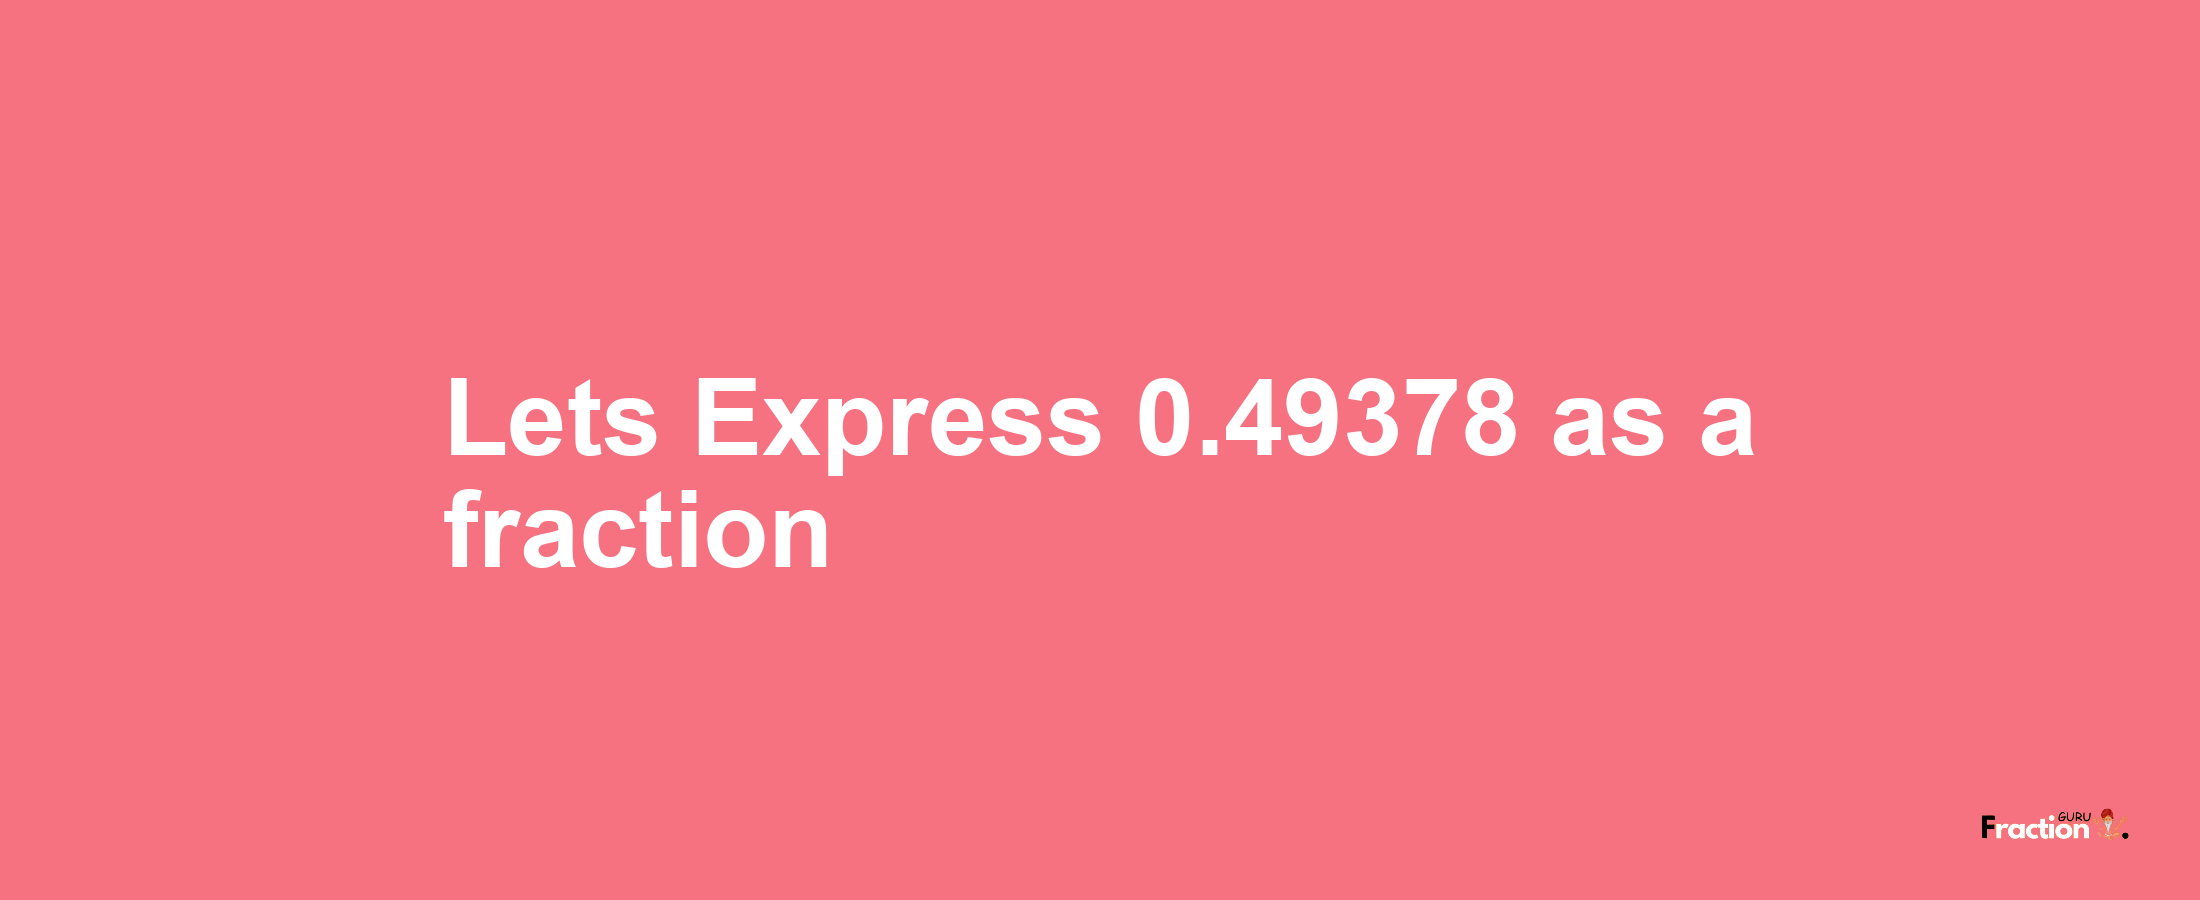 Lets Express 0.49378 as afraction